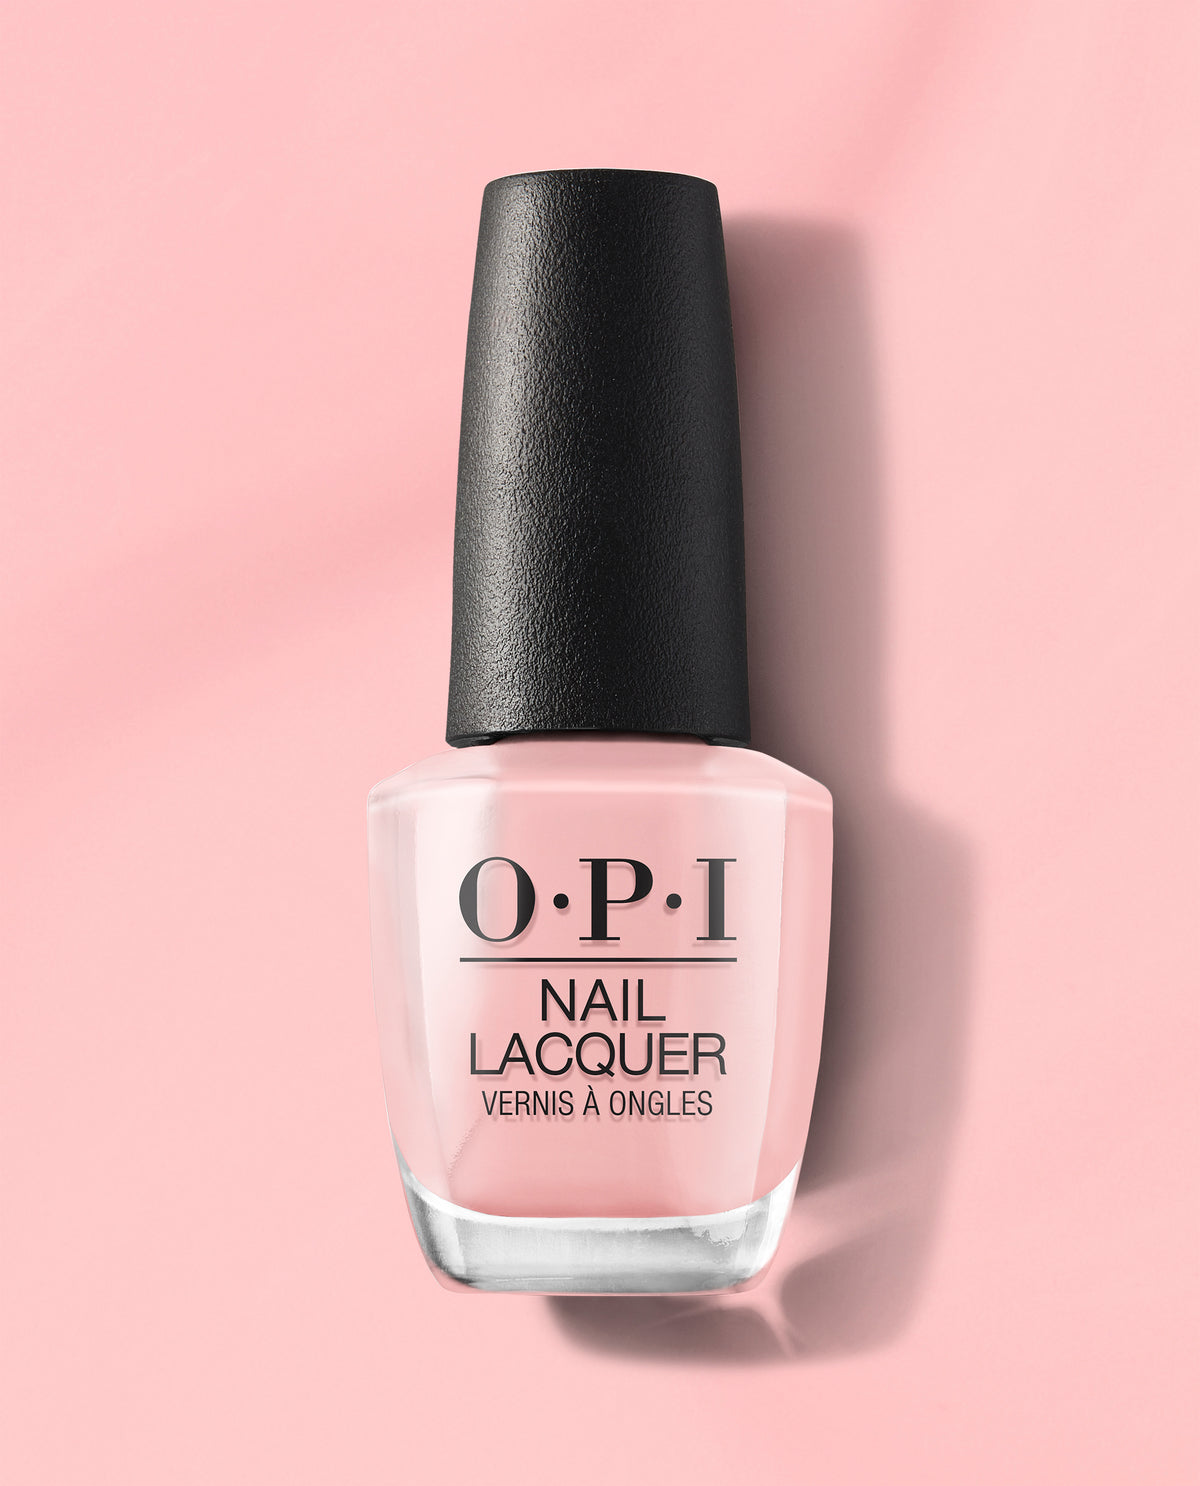 Tagus in That Selfie! - Pink Nail Lacquer | OPI